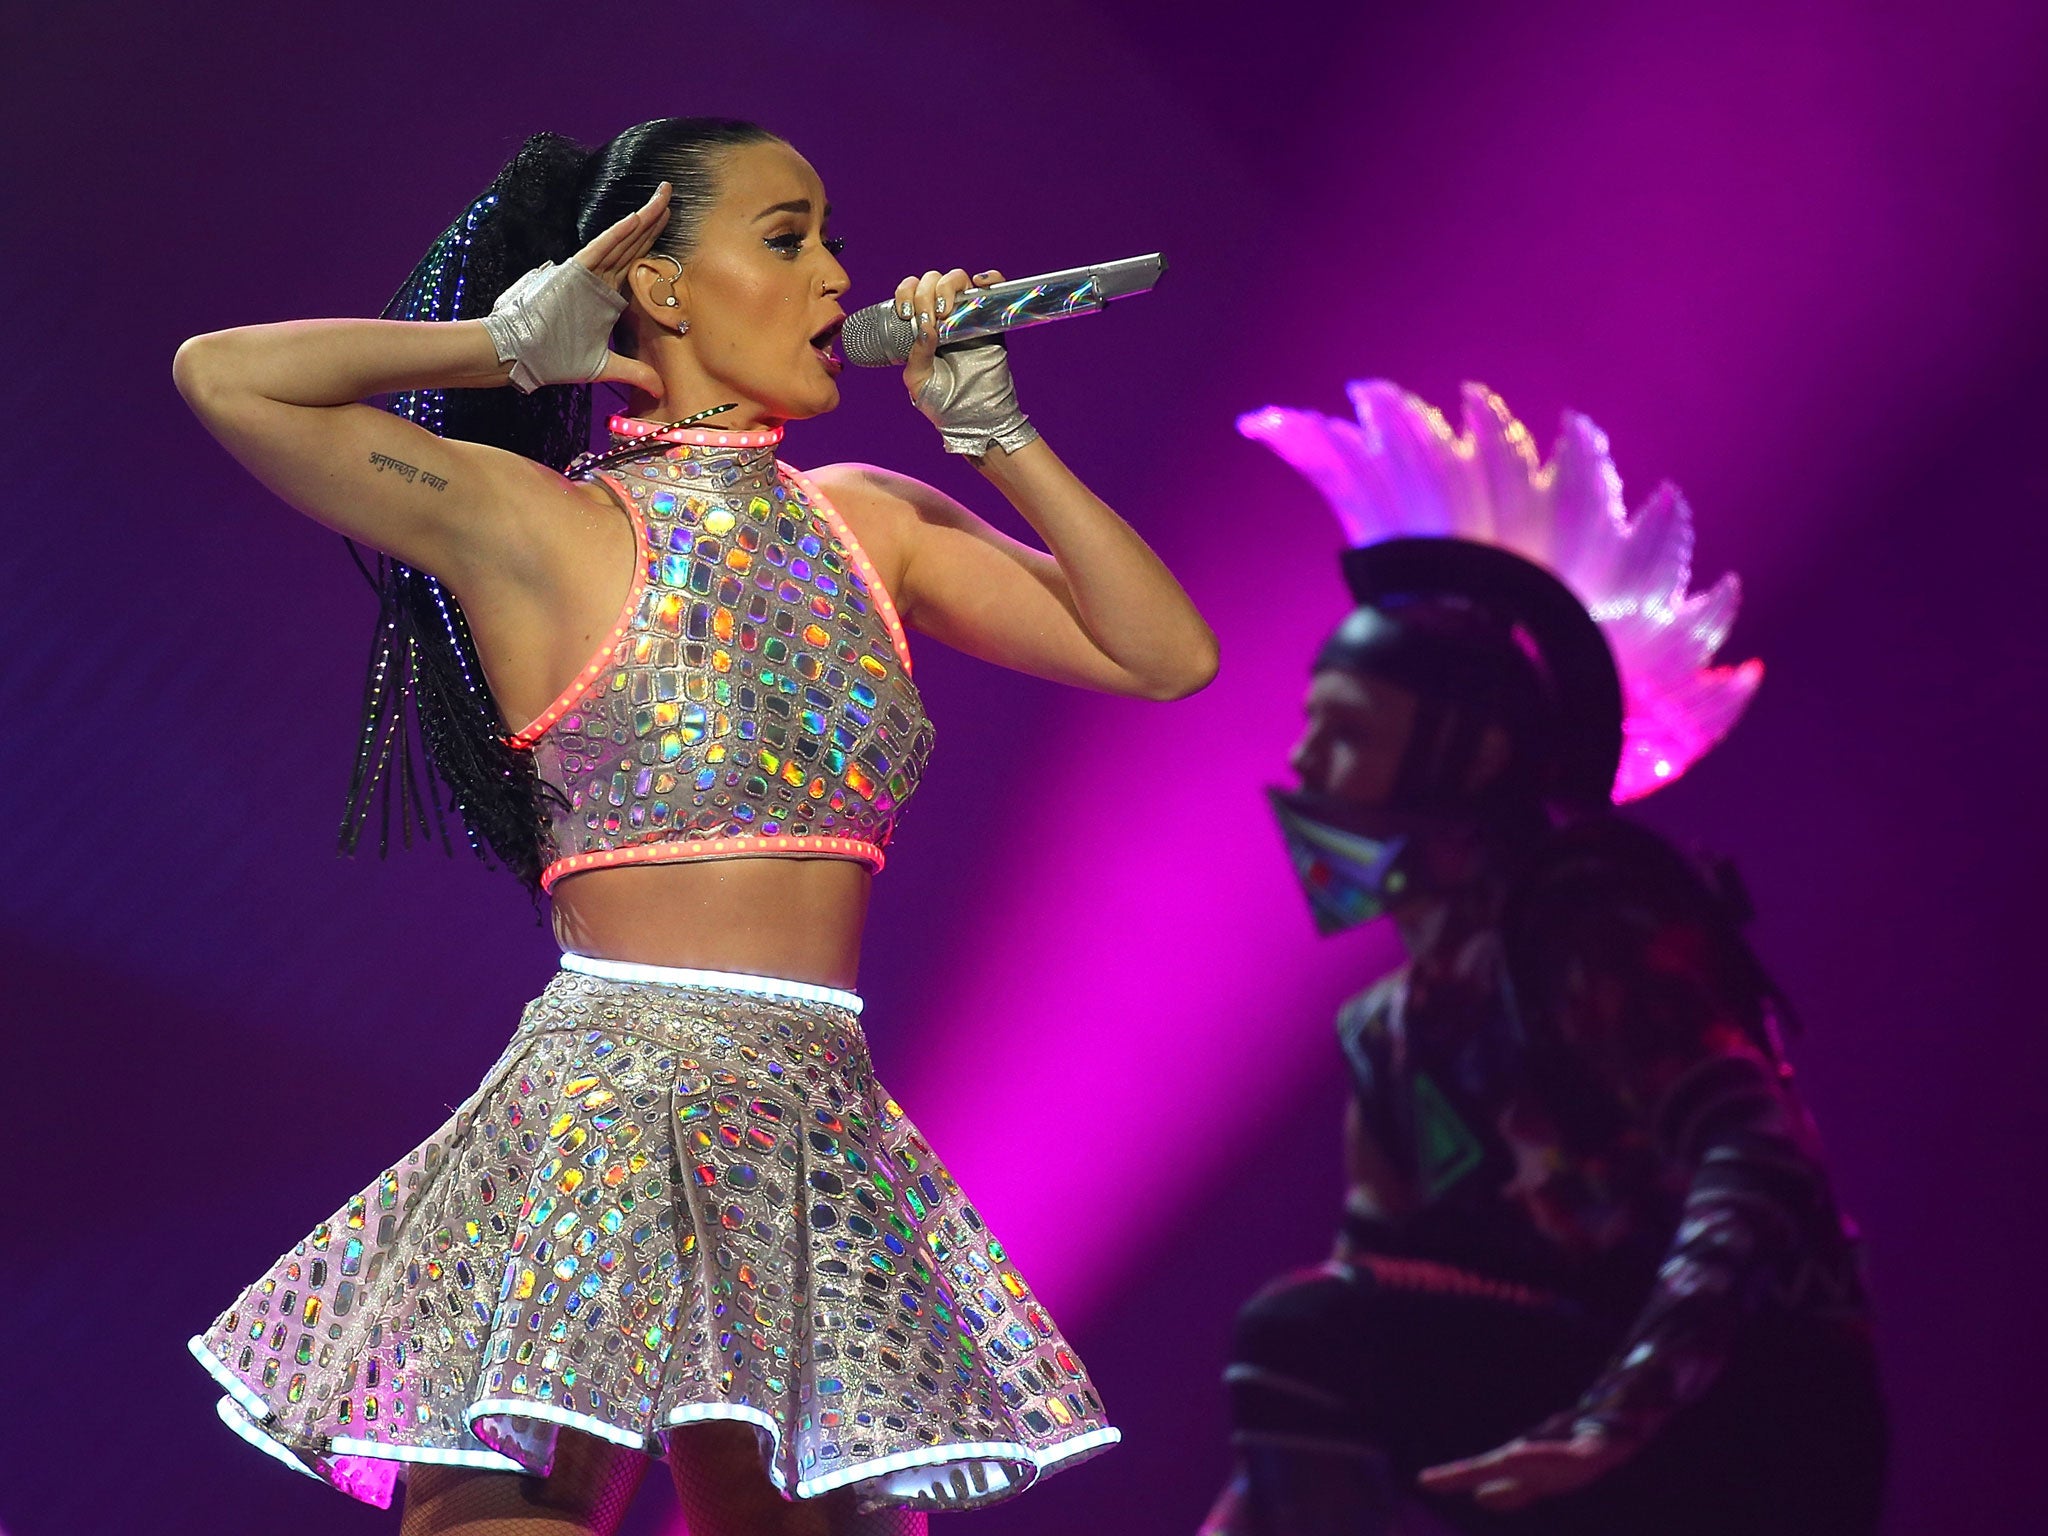 Katy Perry will be taking to the Grammys stage on Sunday 8 February